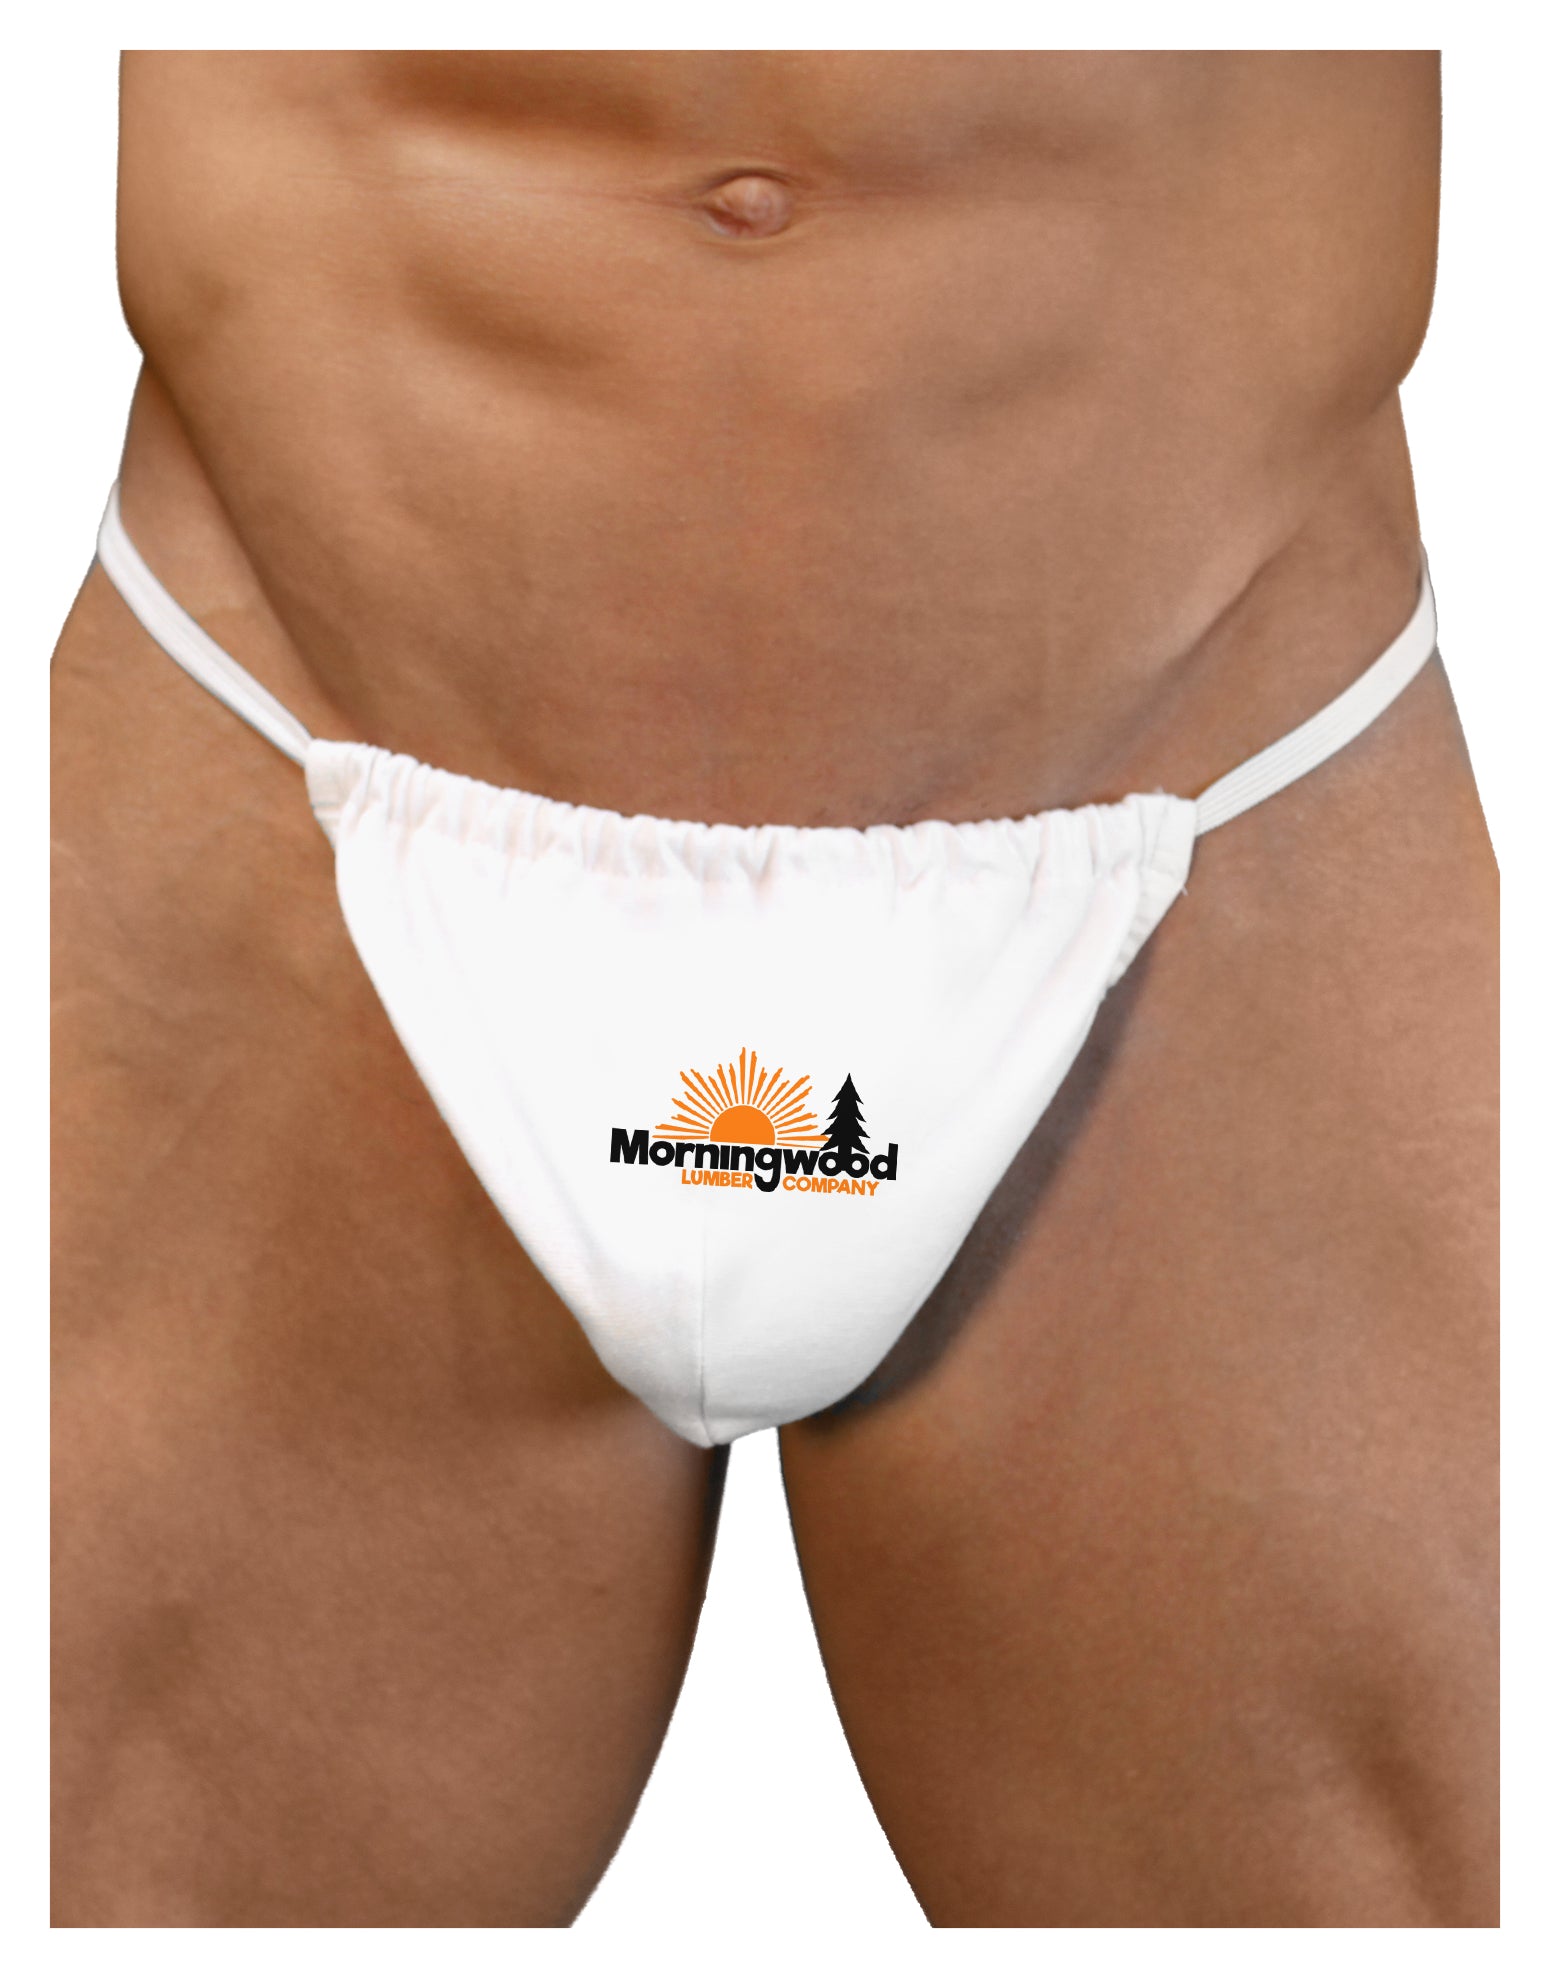 Morningwood Company Funny Mens G-String Underwear by TooLoud